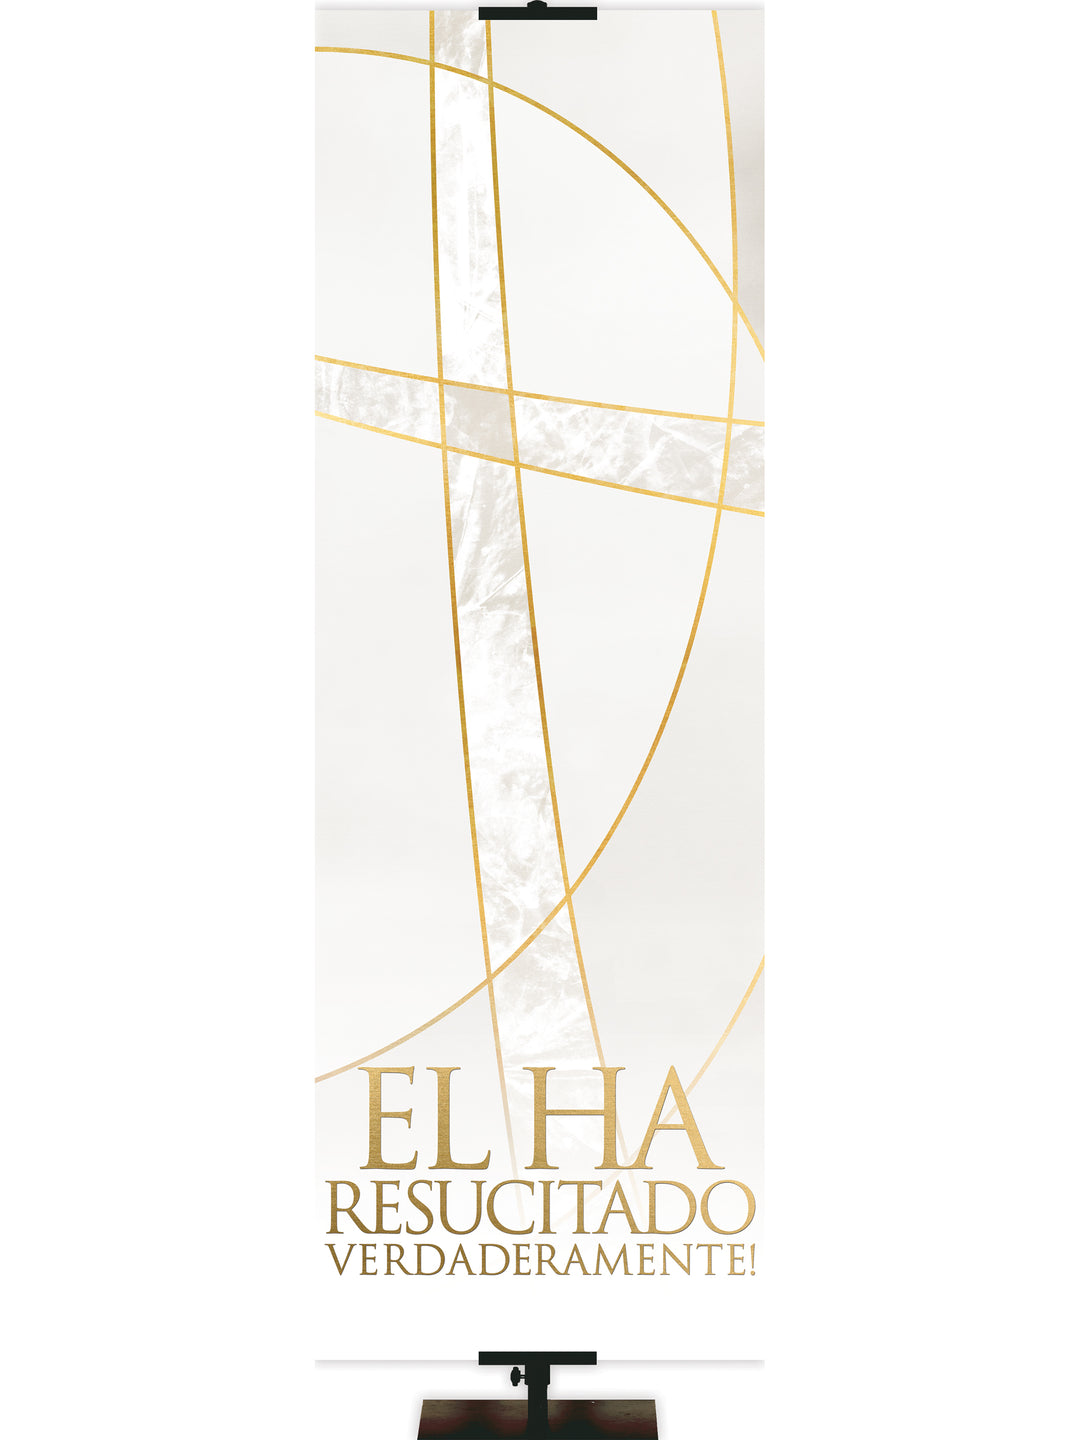 Spanish Easter Liturgy He Is Risen with Gold Stylized Cross and gold accents on White Banner thin format and right orientation